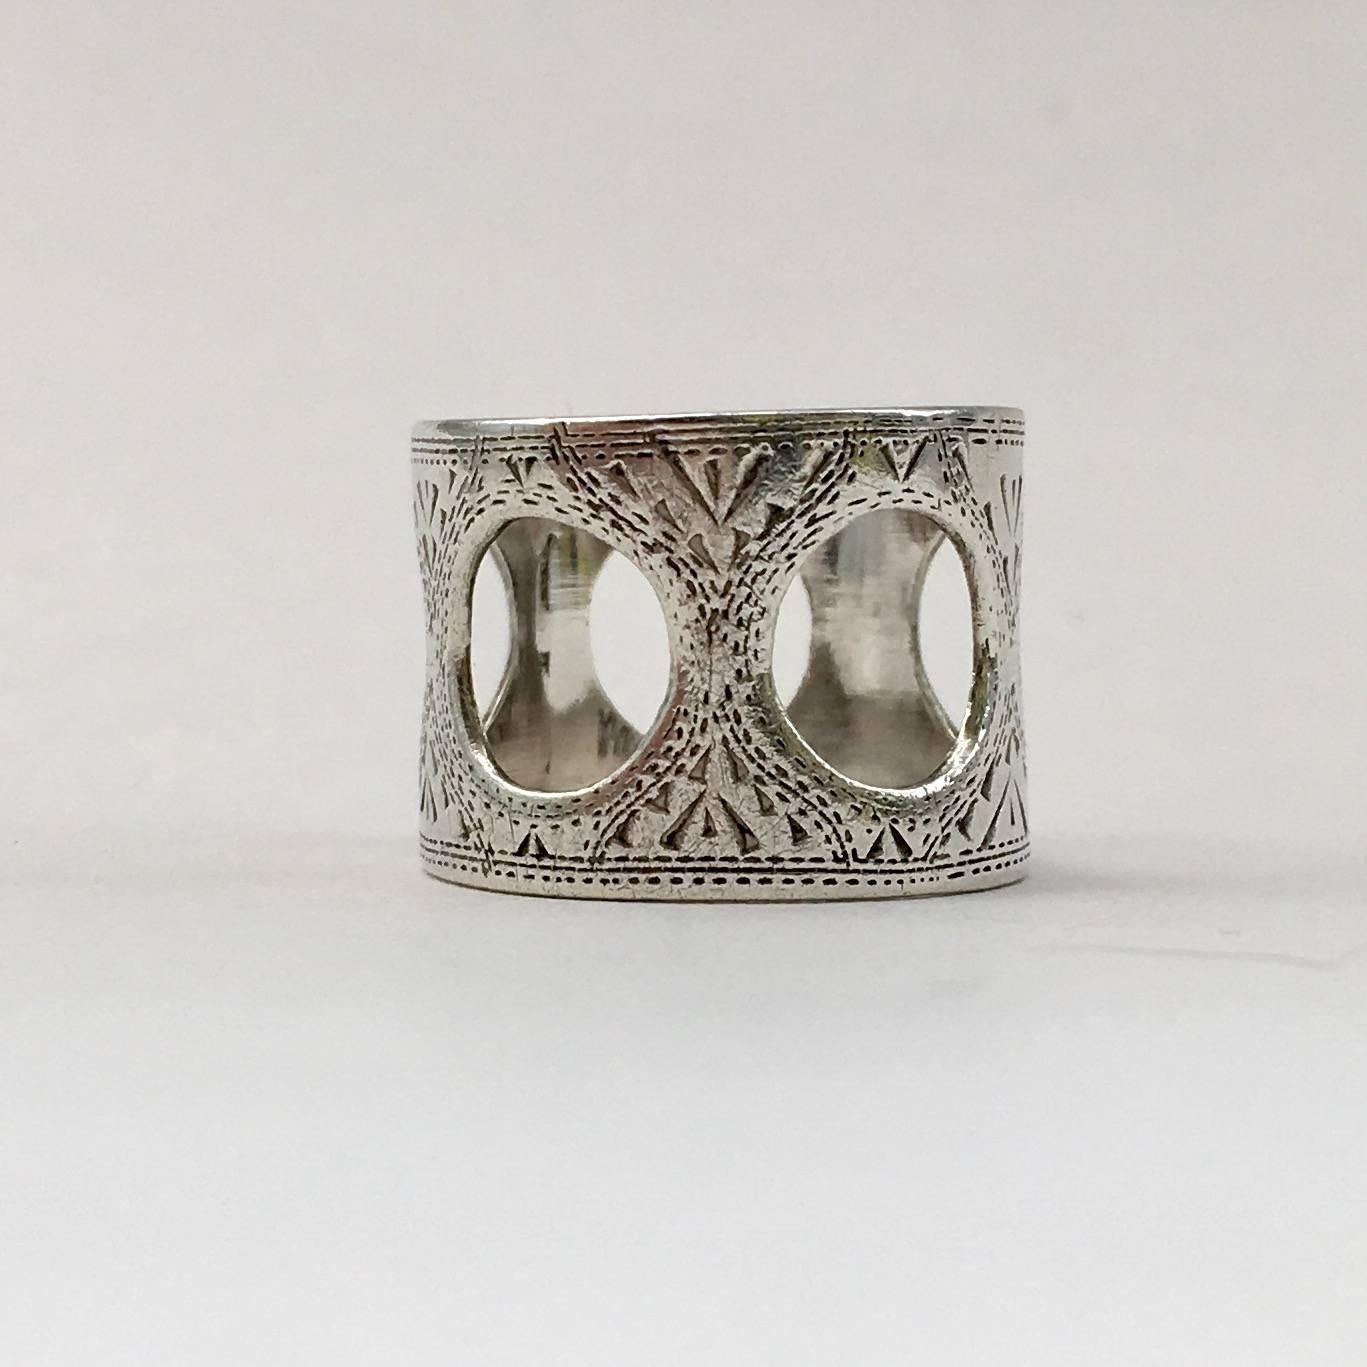 A lovely example of Siam silver, this vintage ring is stylish and wearable. It has unusual circular cutouts and delicate engraving. The band has a depth of 1.8cm and the circles have a diameter of 0.8cm. 

Size: UK N, US 6 1/2 